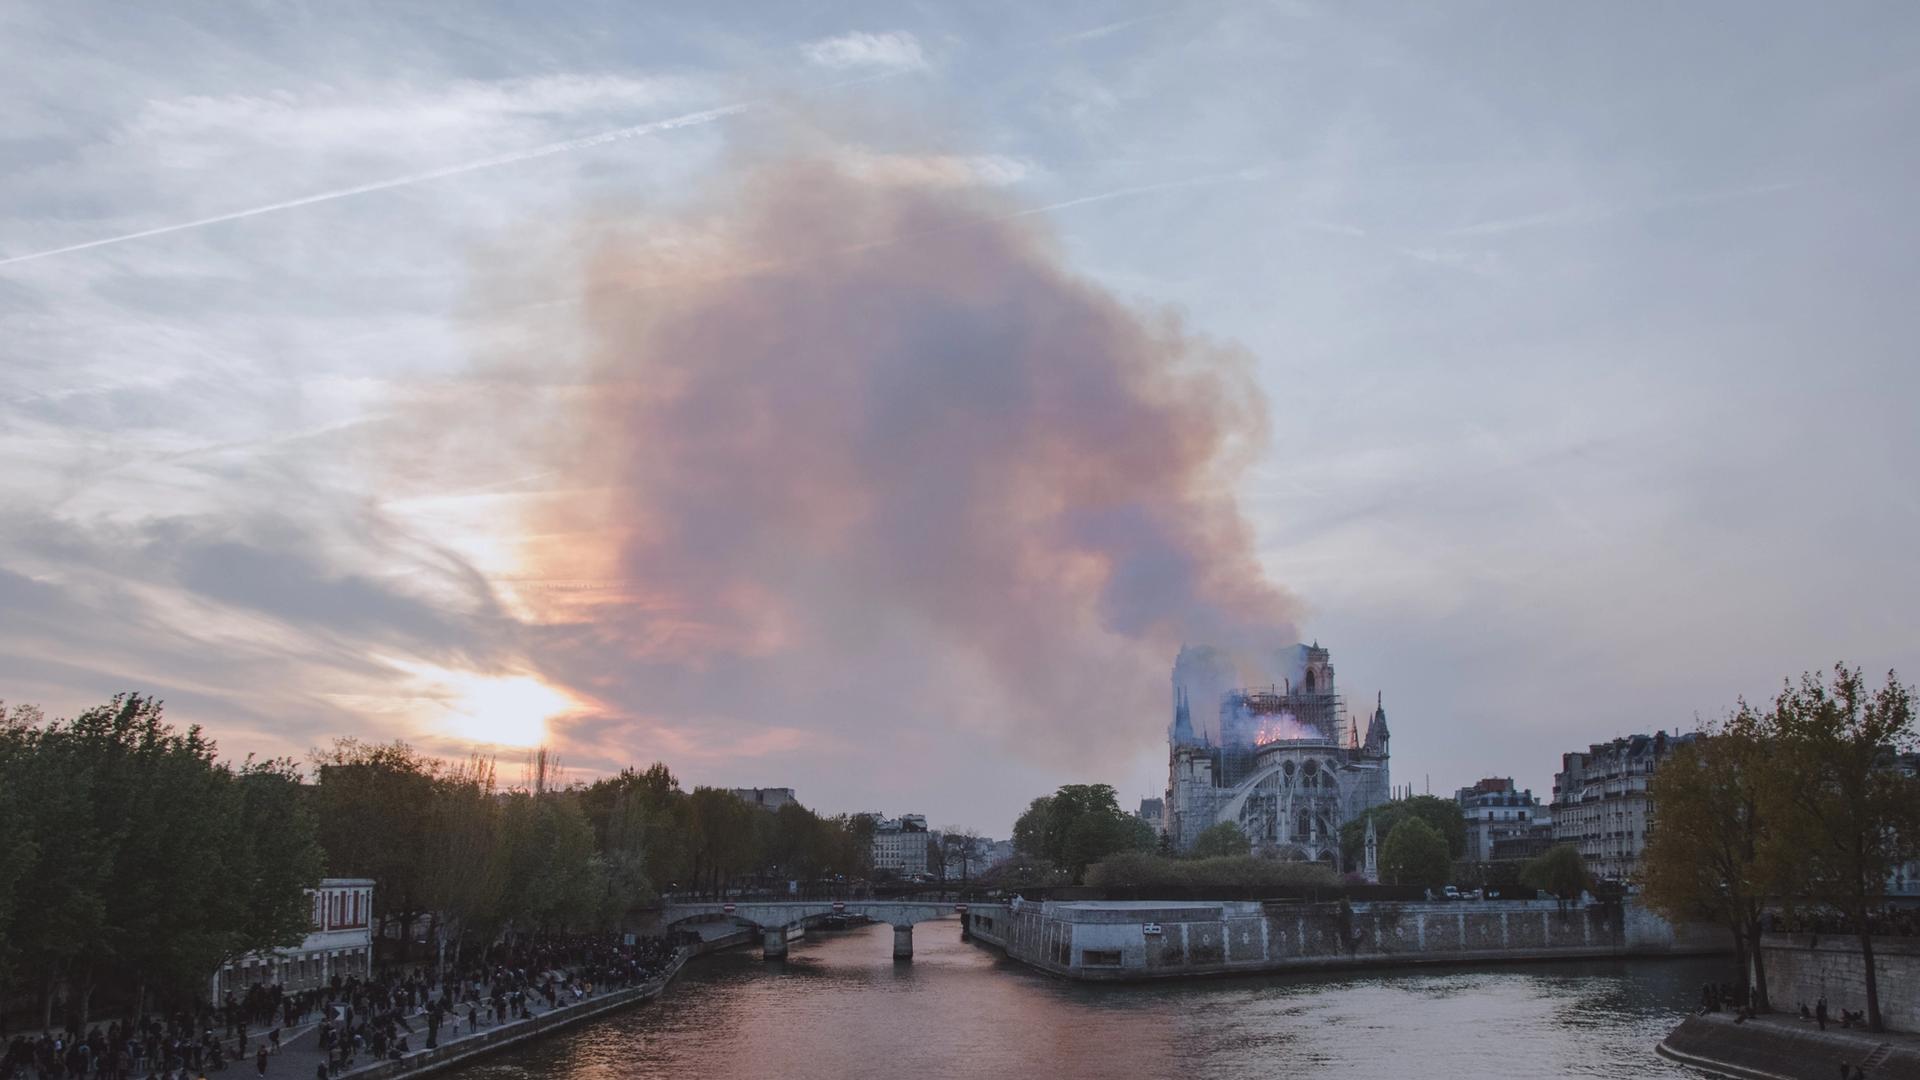 “Unusual” levels of lead have been found around the site of Notre Dame which caught fire in April © Nivenn Lanos